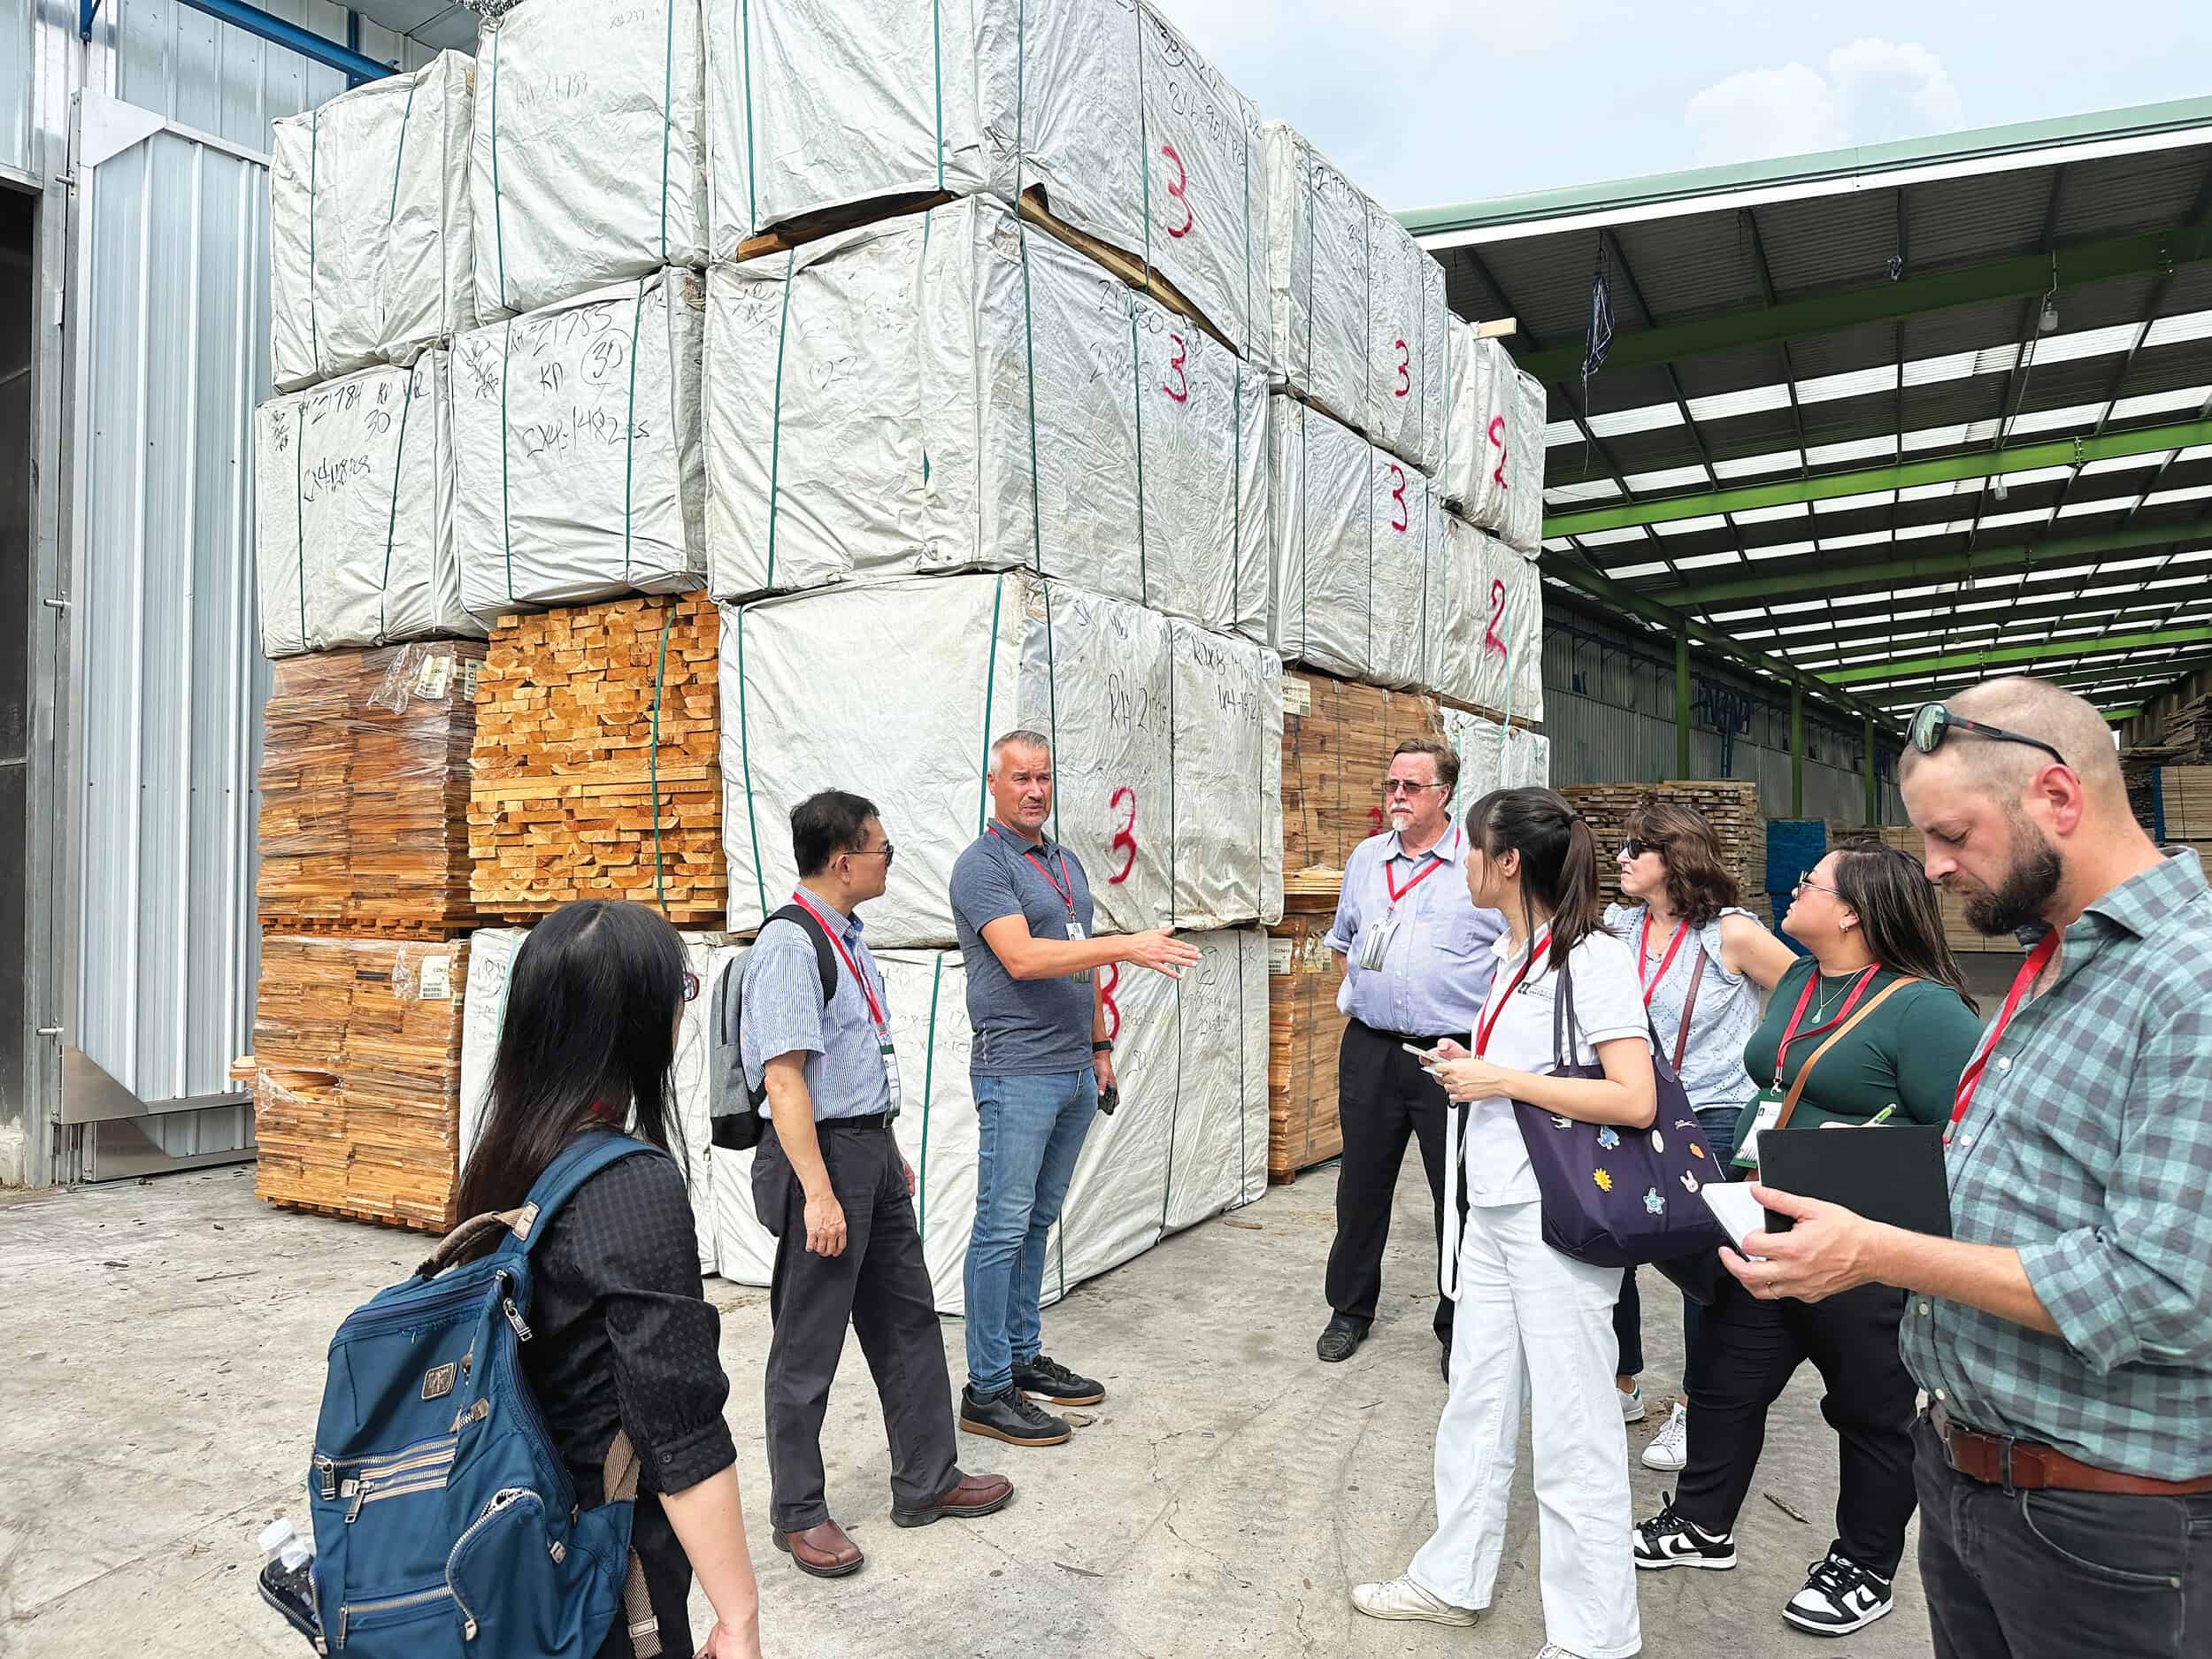 Softwood Export Council Trade Missions Generate International Sales For U.S. Suppliers 3